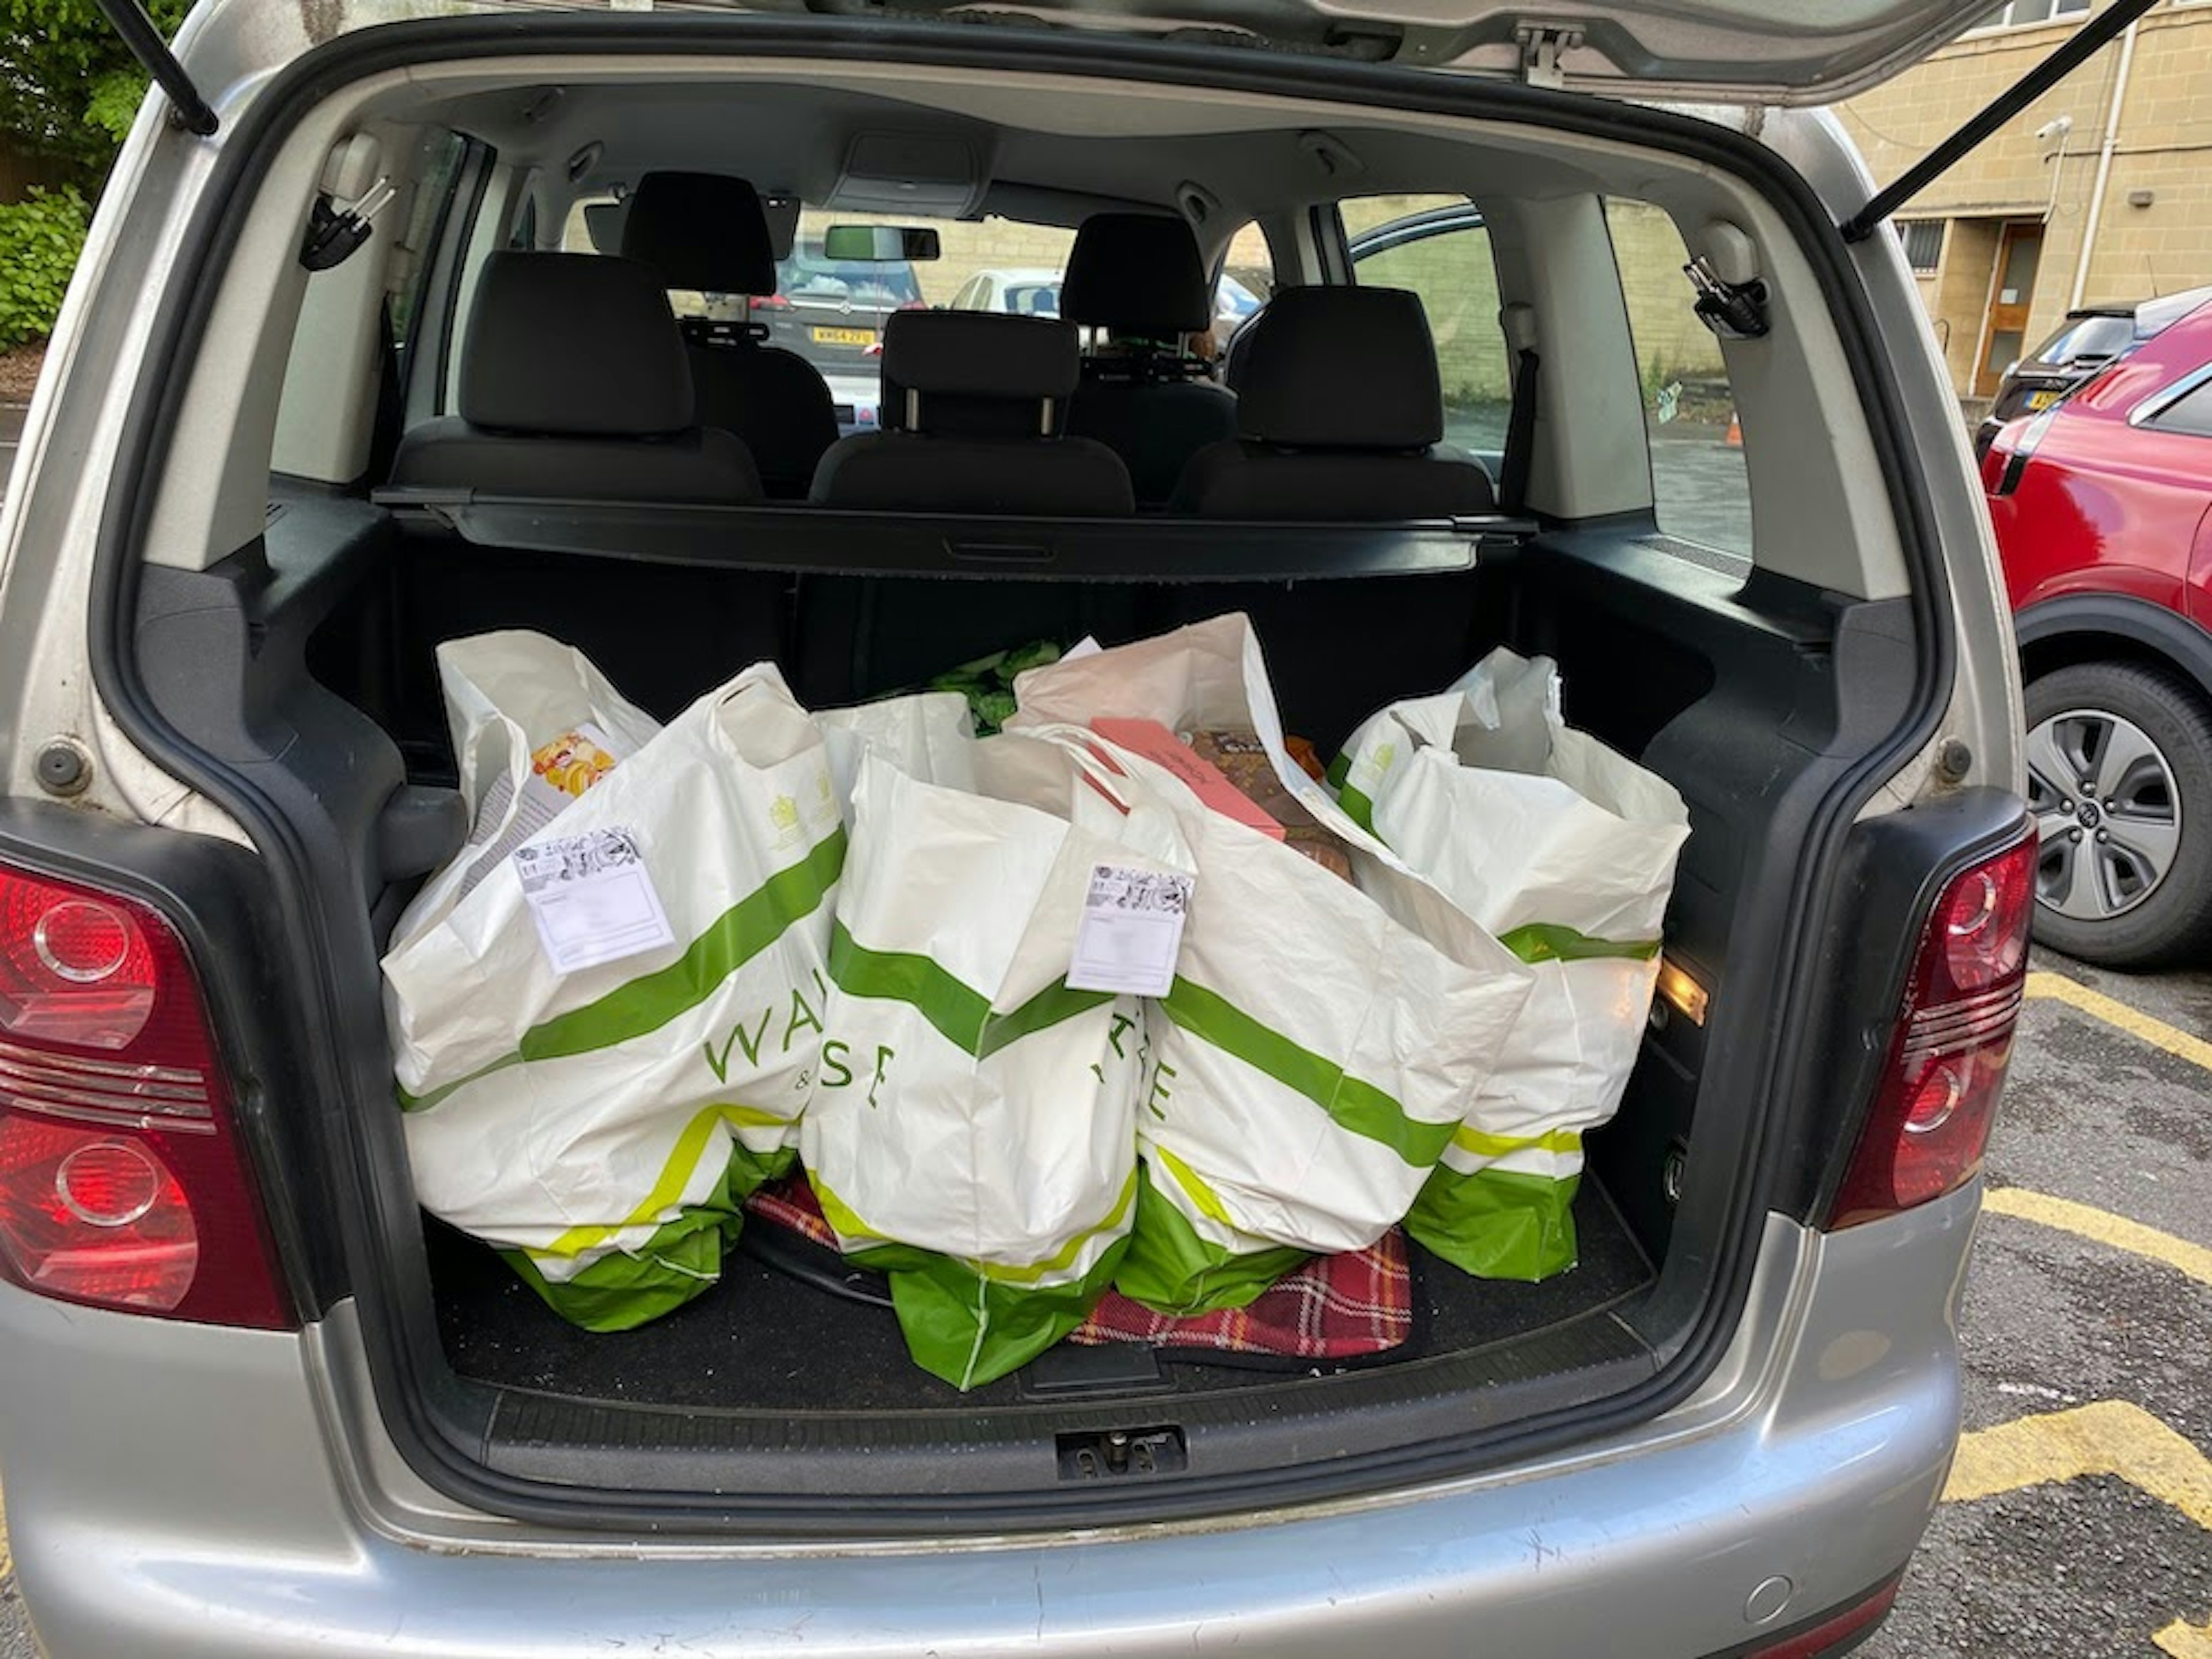 Oasis Hub Bath's food parcel delivery service delivers free meals to low-income families or families affected by COVID-19